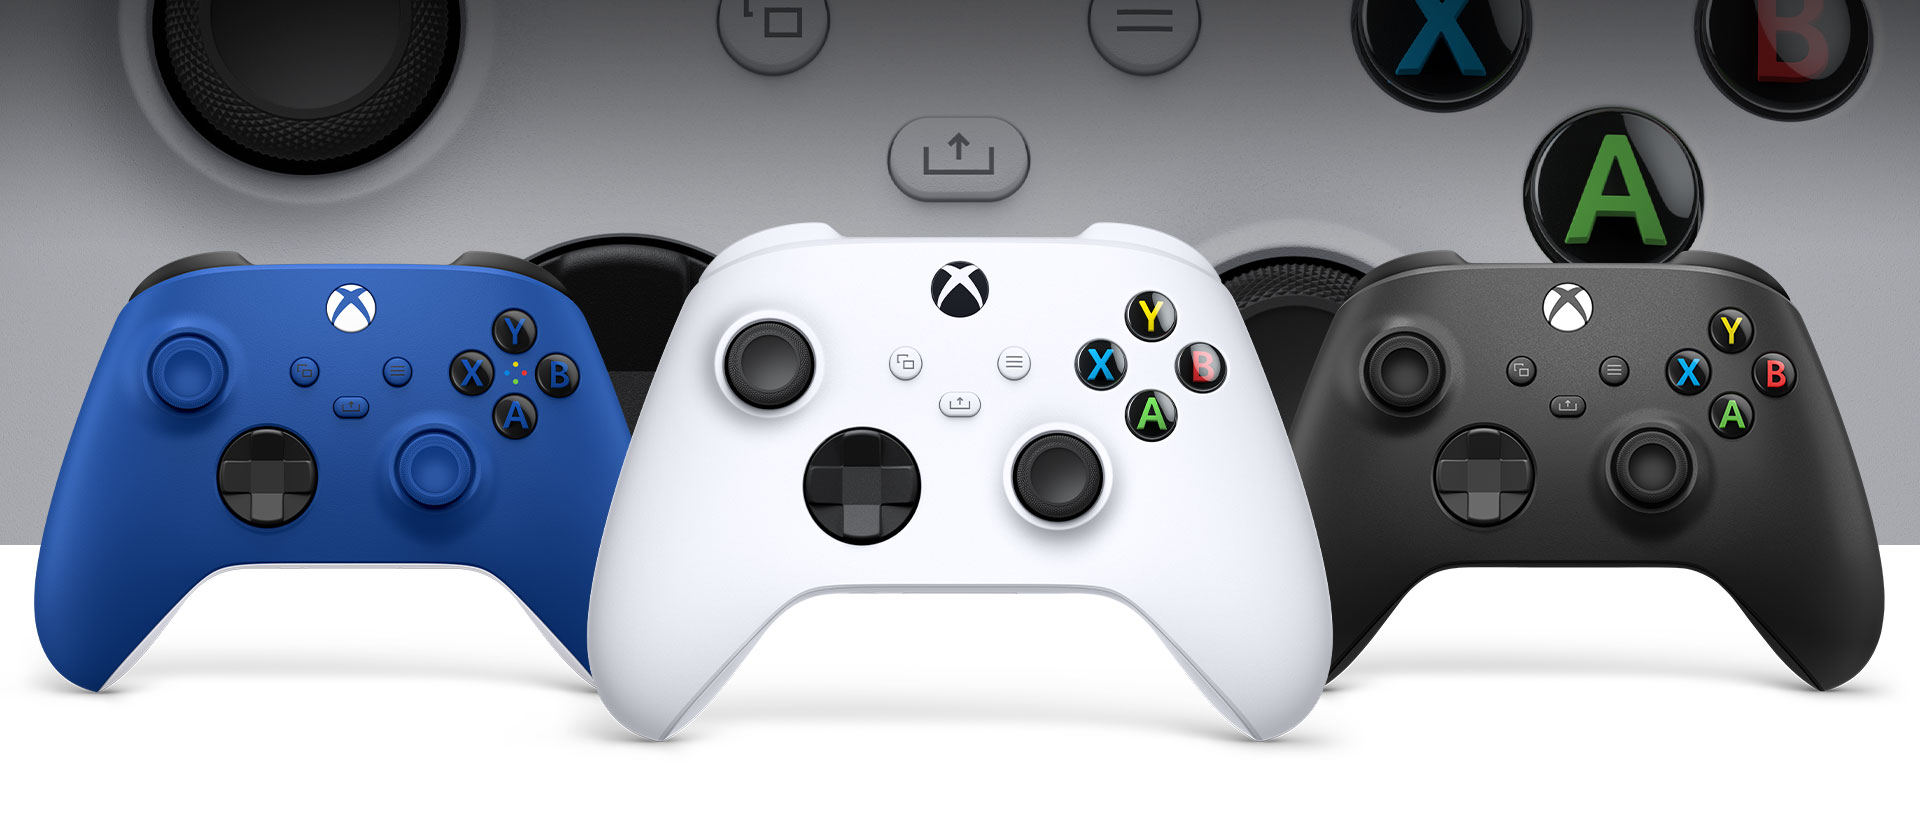 Xbox Robot controller in front with the Carbon xbox and shock blue controllers beside it